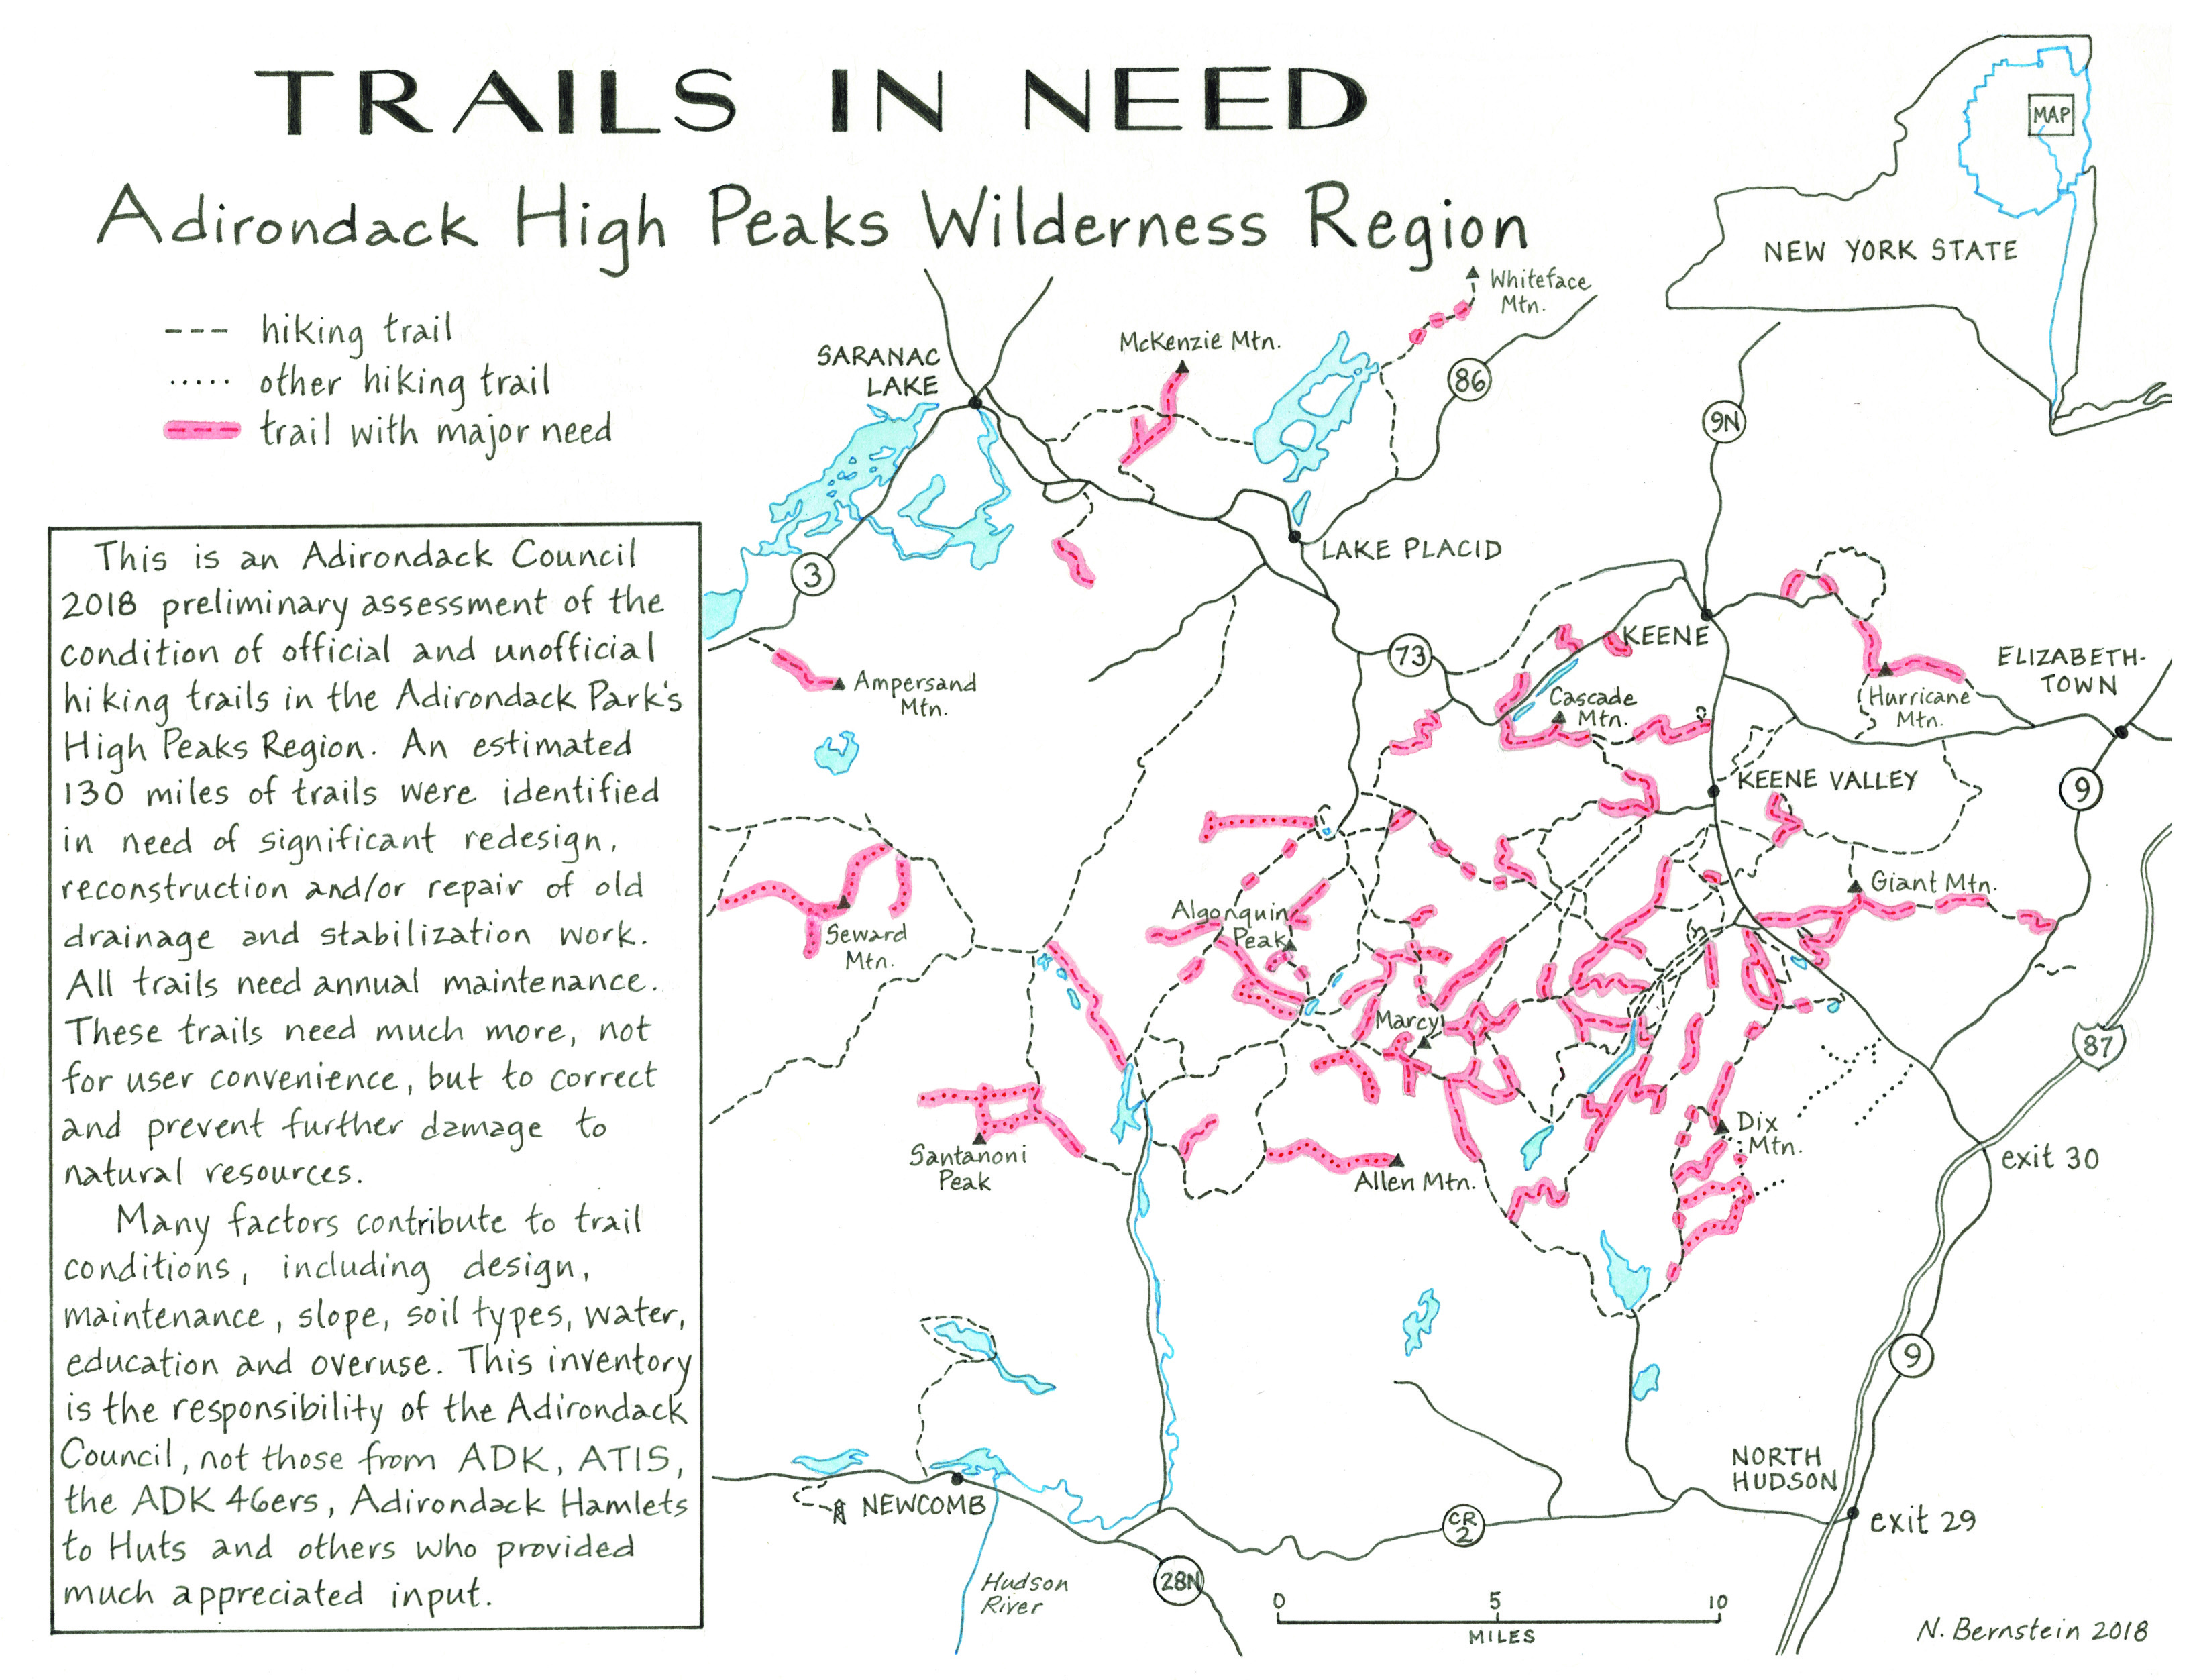 Uploaded Image: /vs-uploads/press-releases/Trails in Need map and assessment-1.jpg